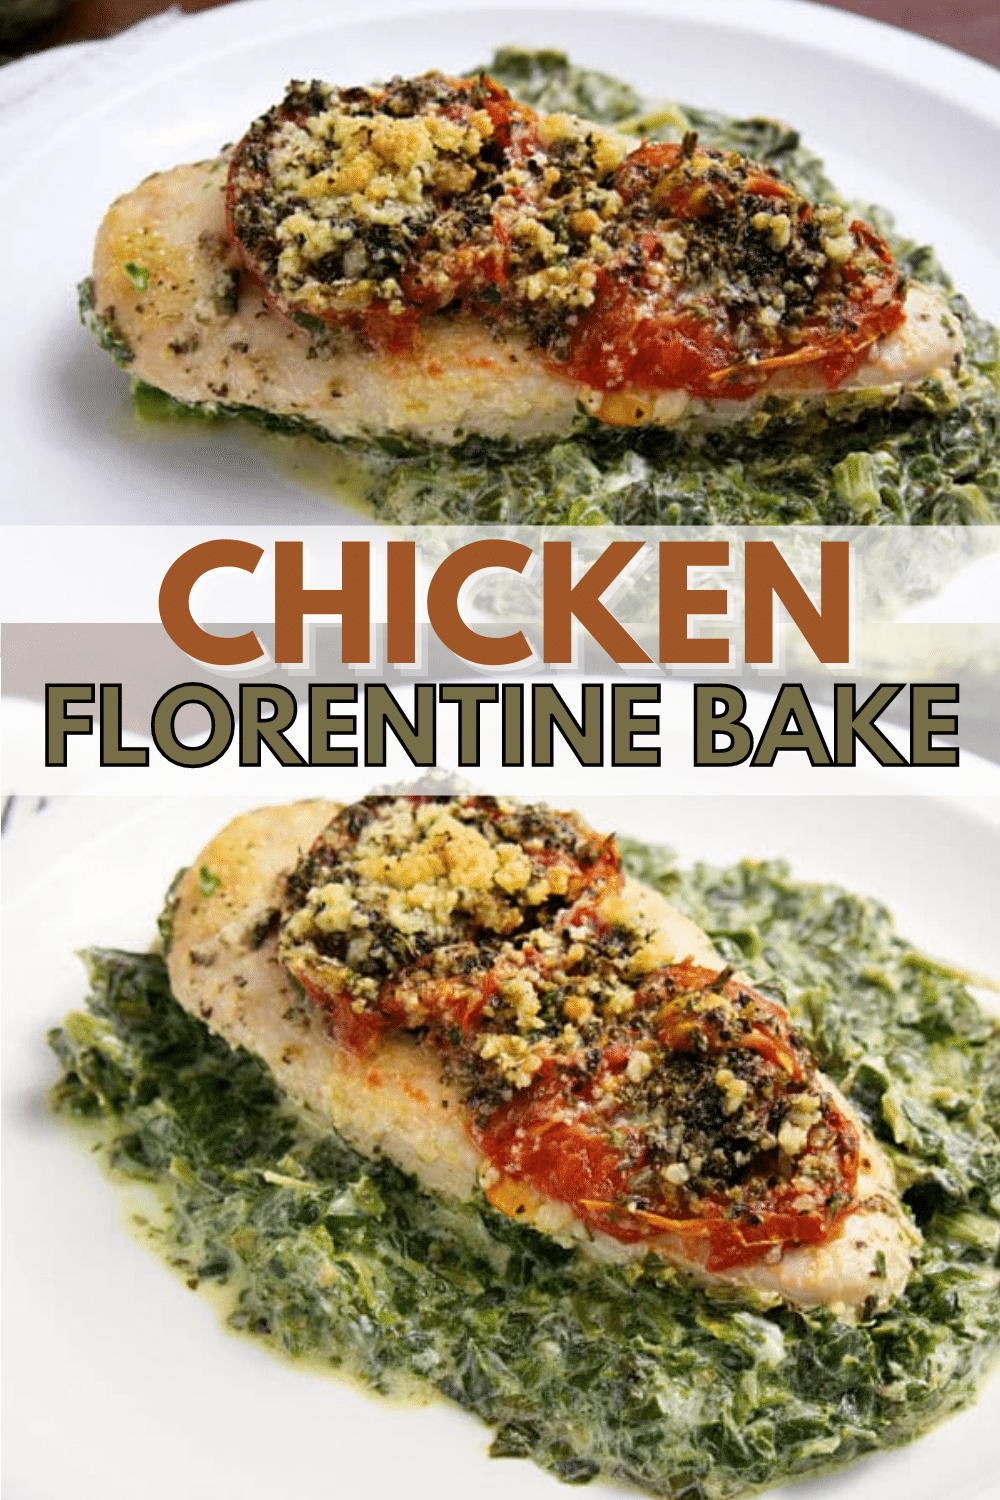 This Chicken Florentine Bake is an easy and flavorful dinner. I cut the fat and calories so this version is equally tasty but healthier. #chicken #chickenflorentinebake #bakedchicken #dinner via @wondermomwannab